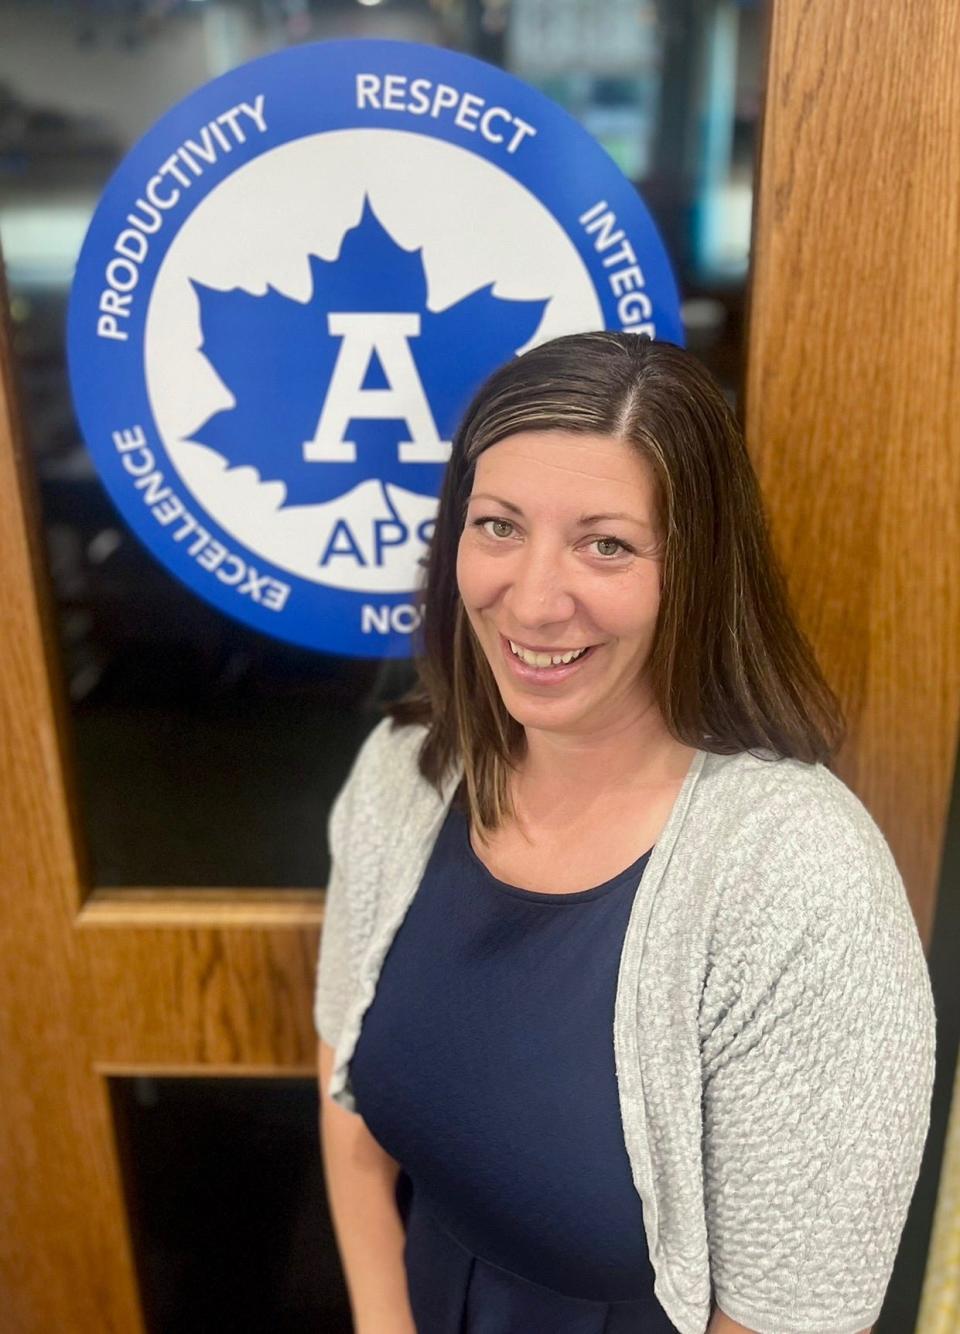 Tiffany Yatzek, currently a special education teacher at Milan Area Schools, has been selected by an interview selection committee to be the next principal at Lincoln Elementary School in Adrian. The Adrian Public Schools Board of Education will consider Yatzek's selection at its June 13 regular meeting.